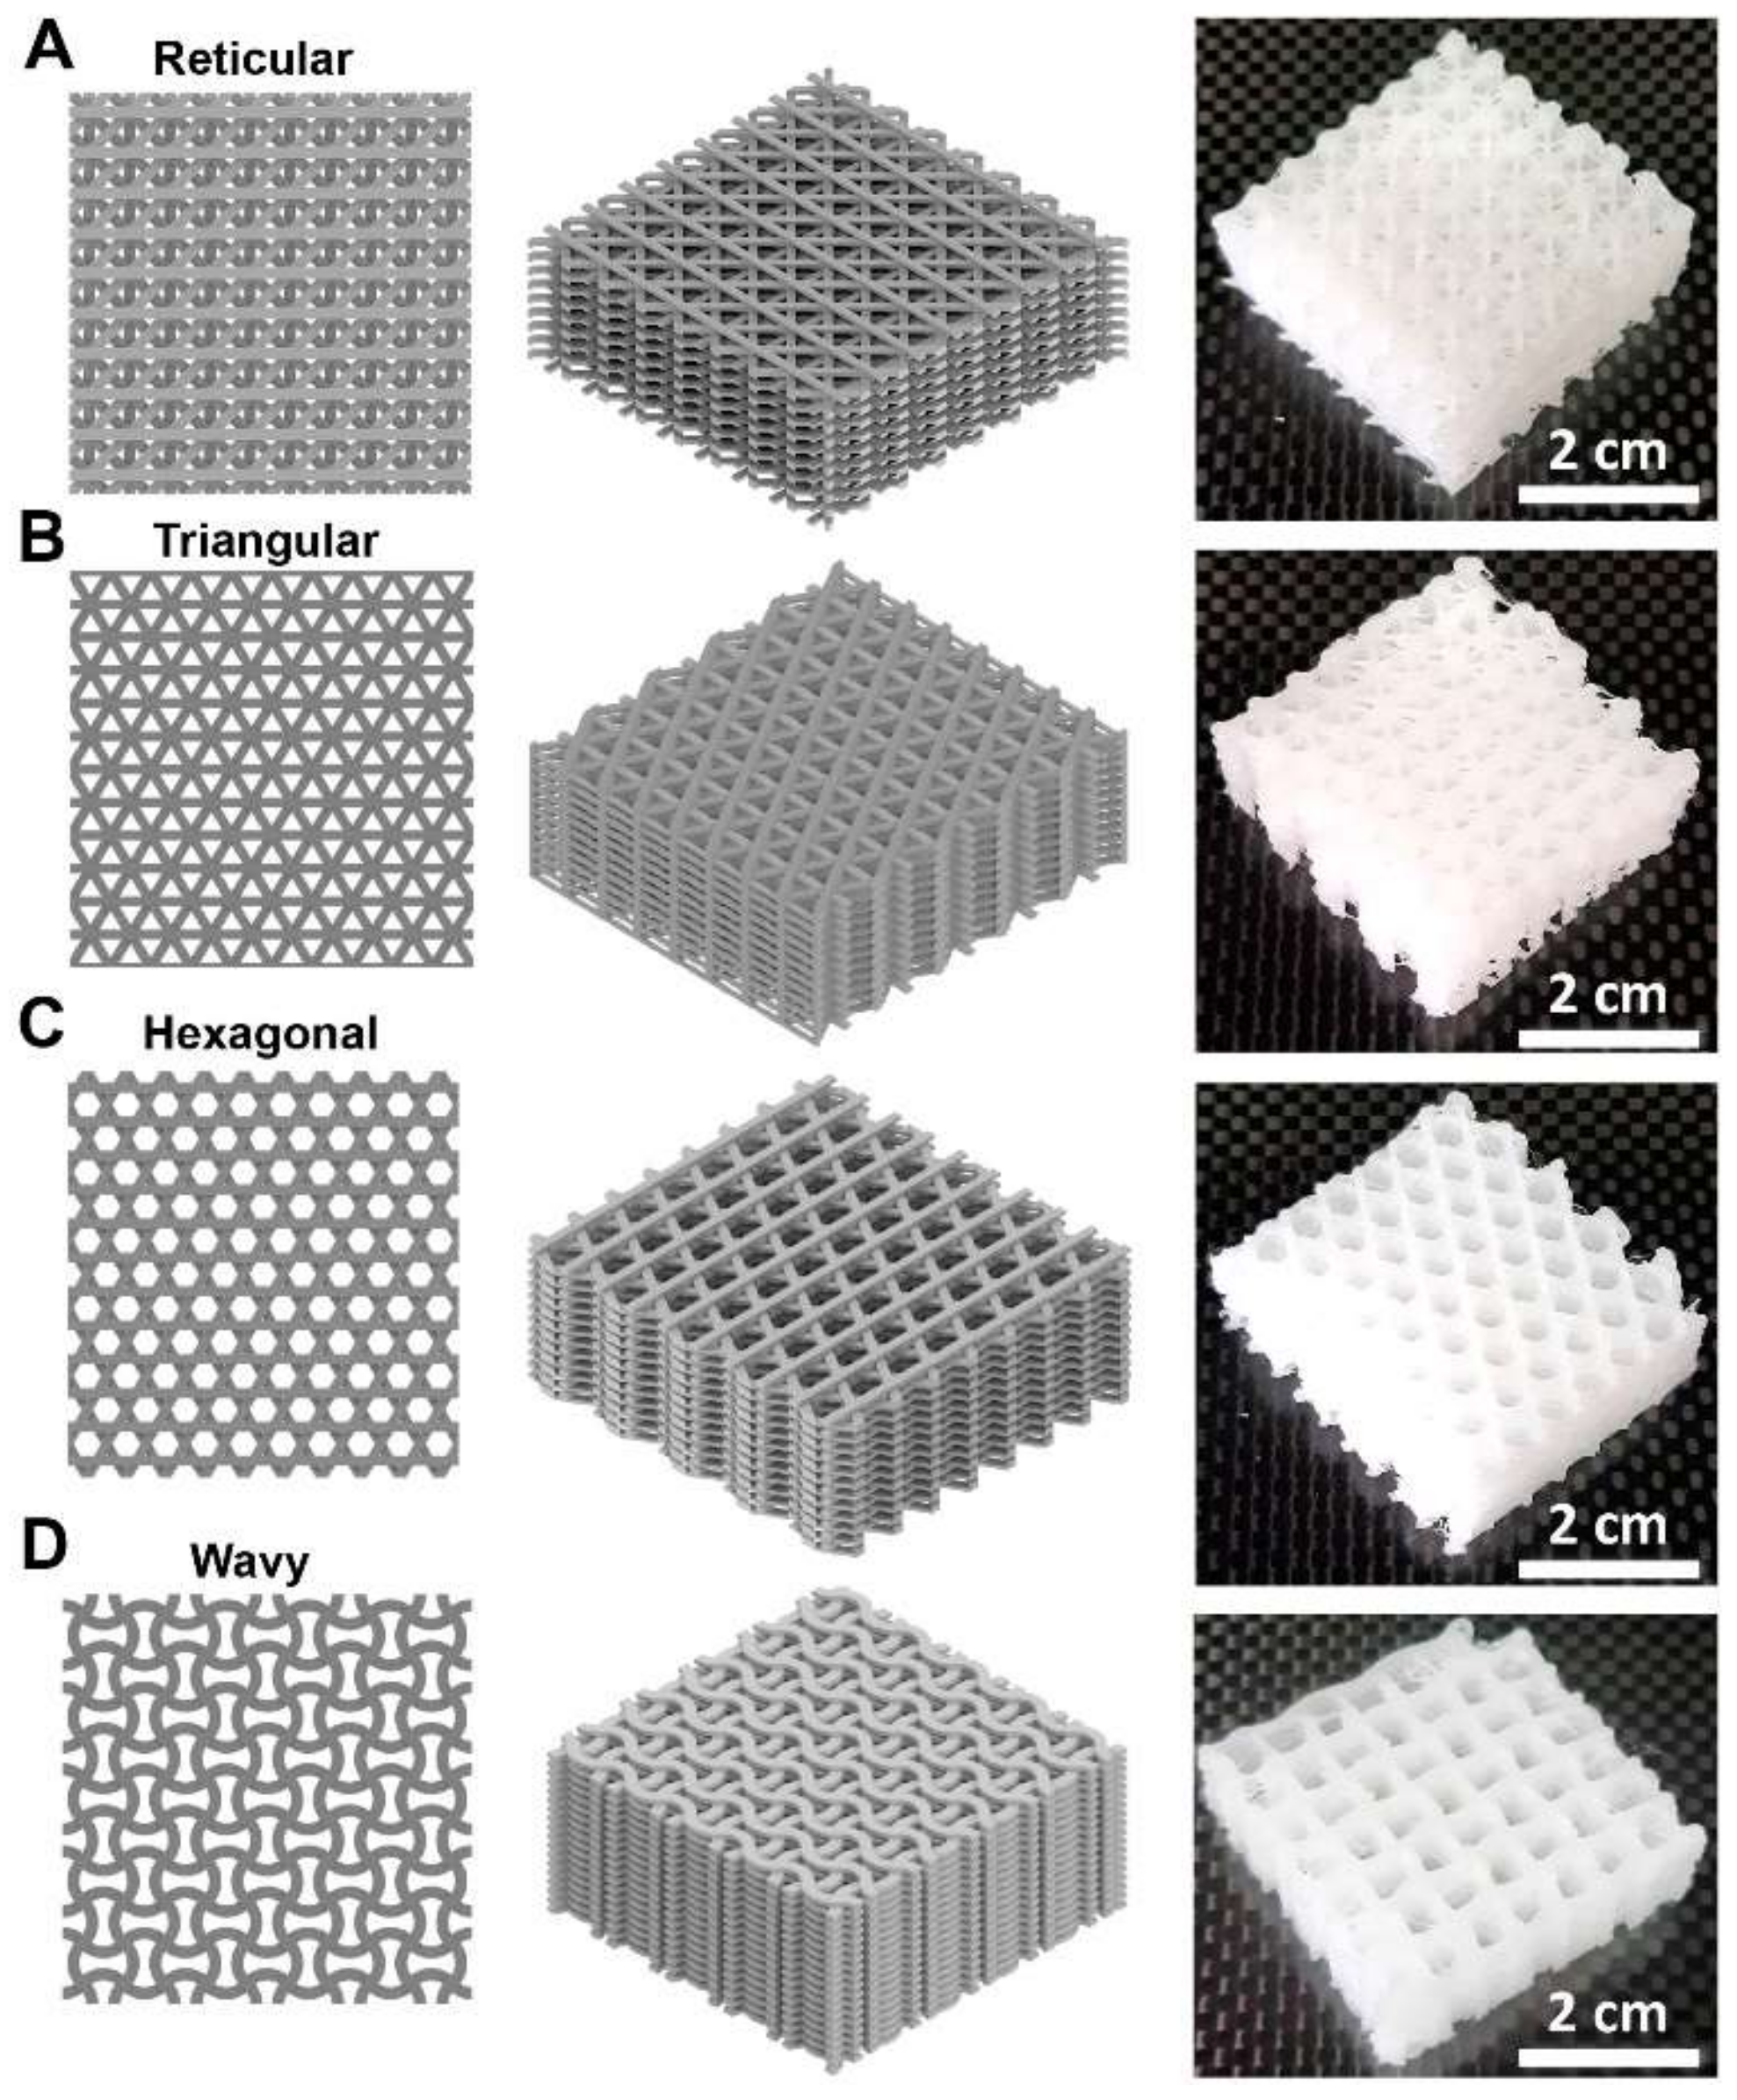 PDF] Freely orientable microstructures for designing deformable 3D prints